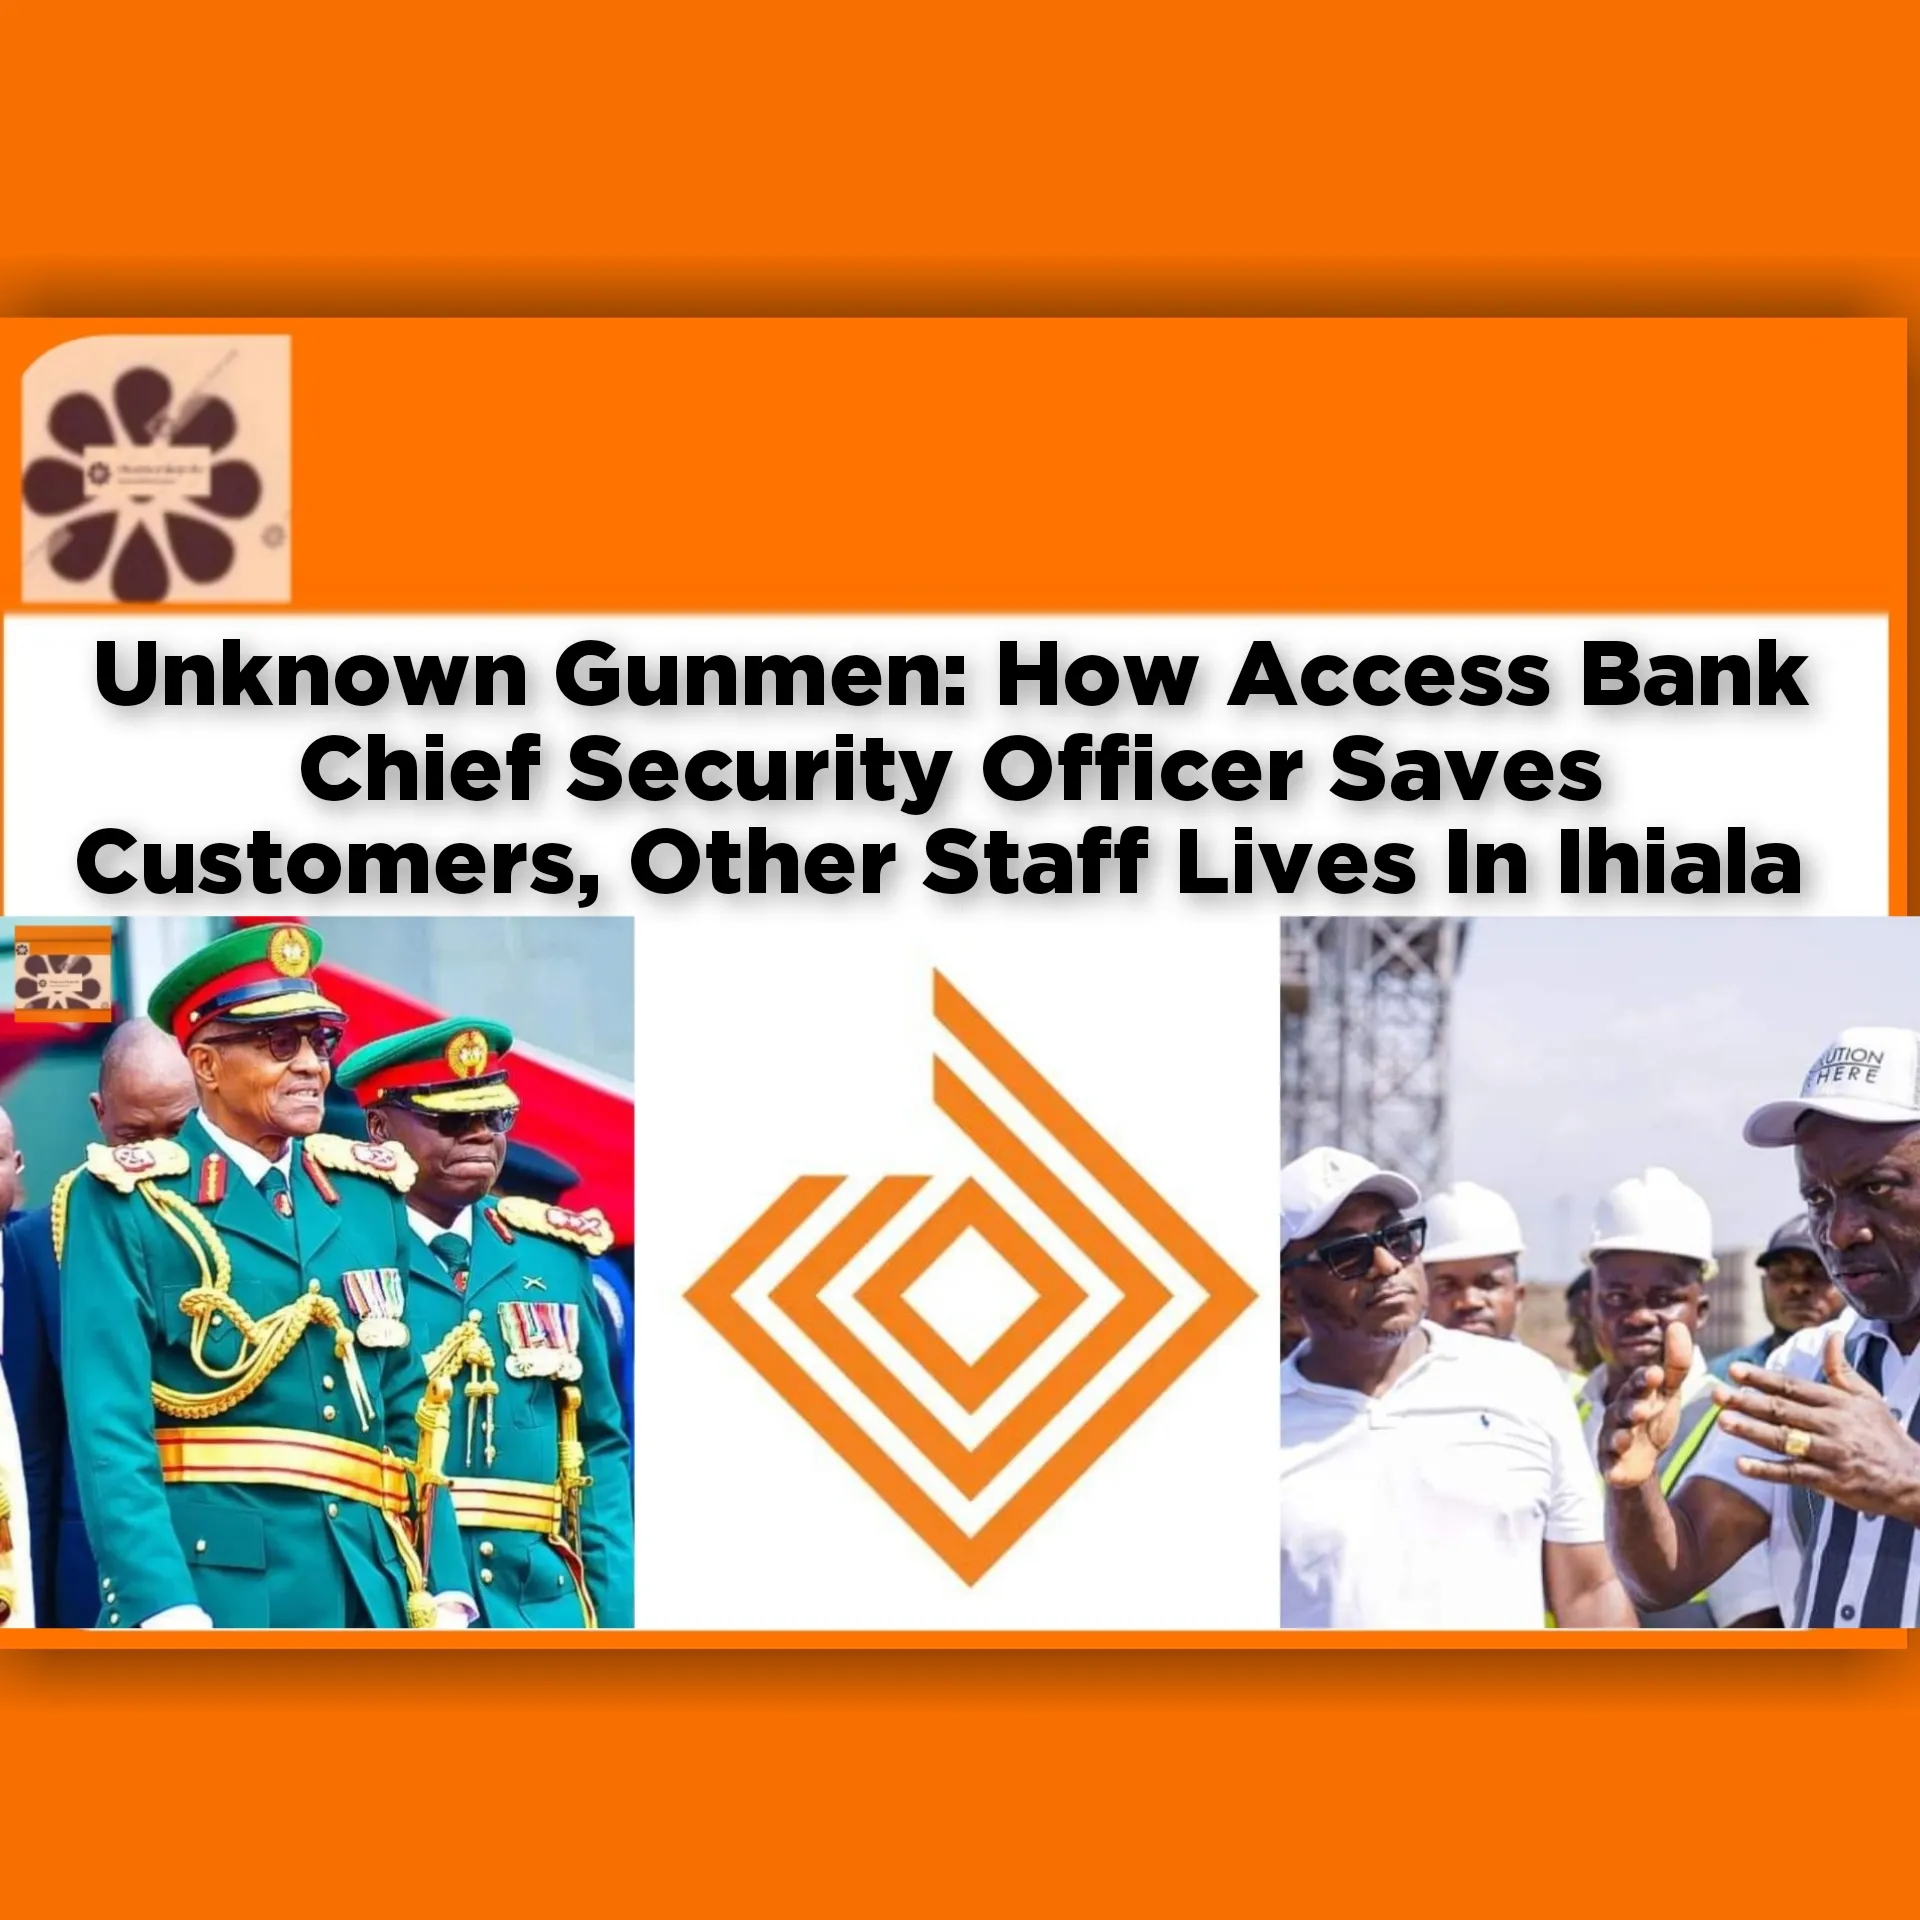 Unknown Gunmen: How Access Bank Chief Security Officer Saves Customers, Other Staff Lives In Ihiala ~ OsazuwaAkonedo #Access #Bank #breaking #customers, #Gunmen #Ihiala #Nigeria #Officer #Okija #security #Sit-at-home #Unknown